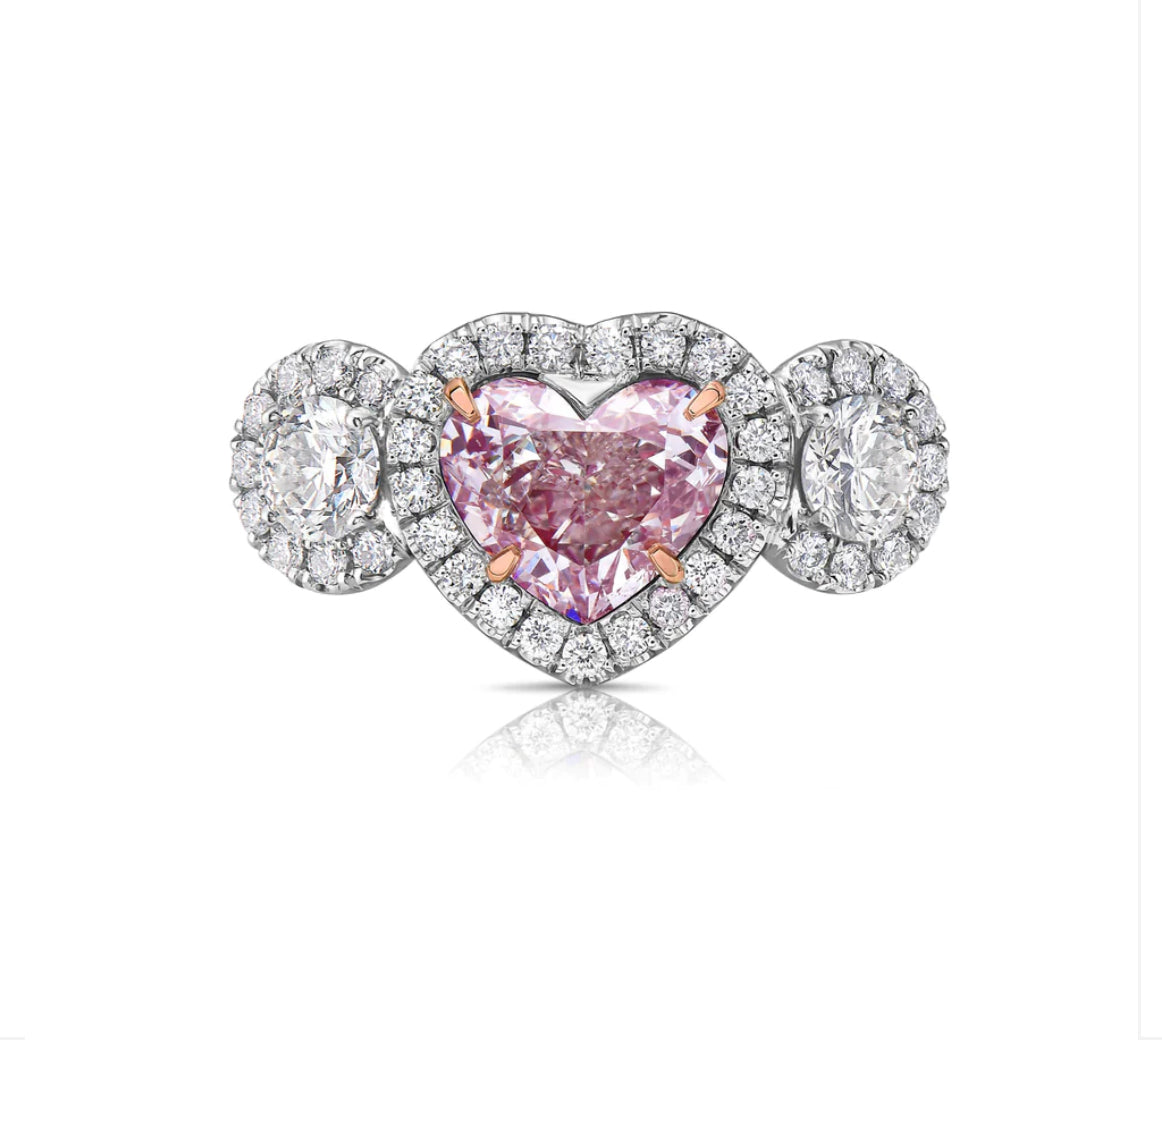 1.37ct Light Pink Heart SI1 GIA Ring